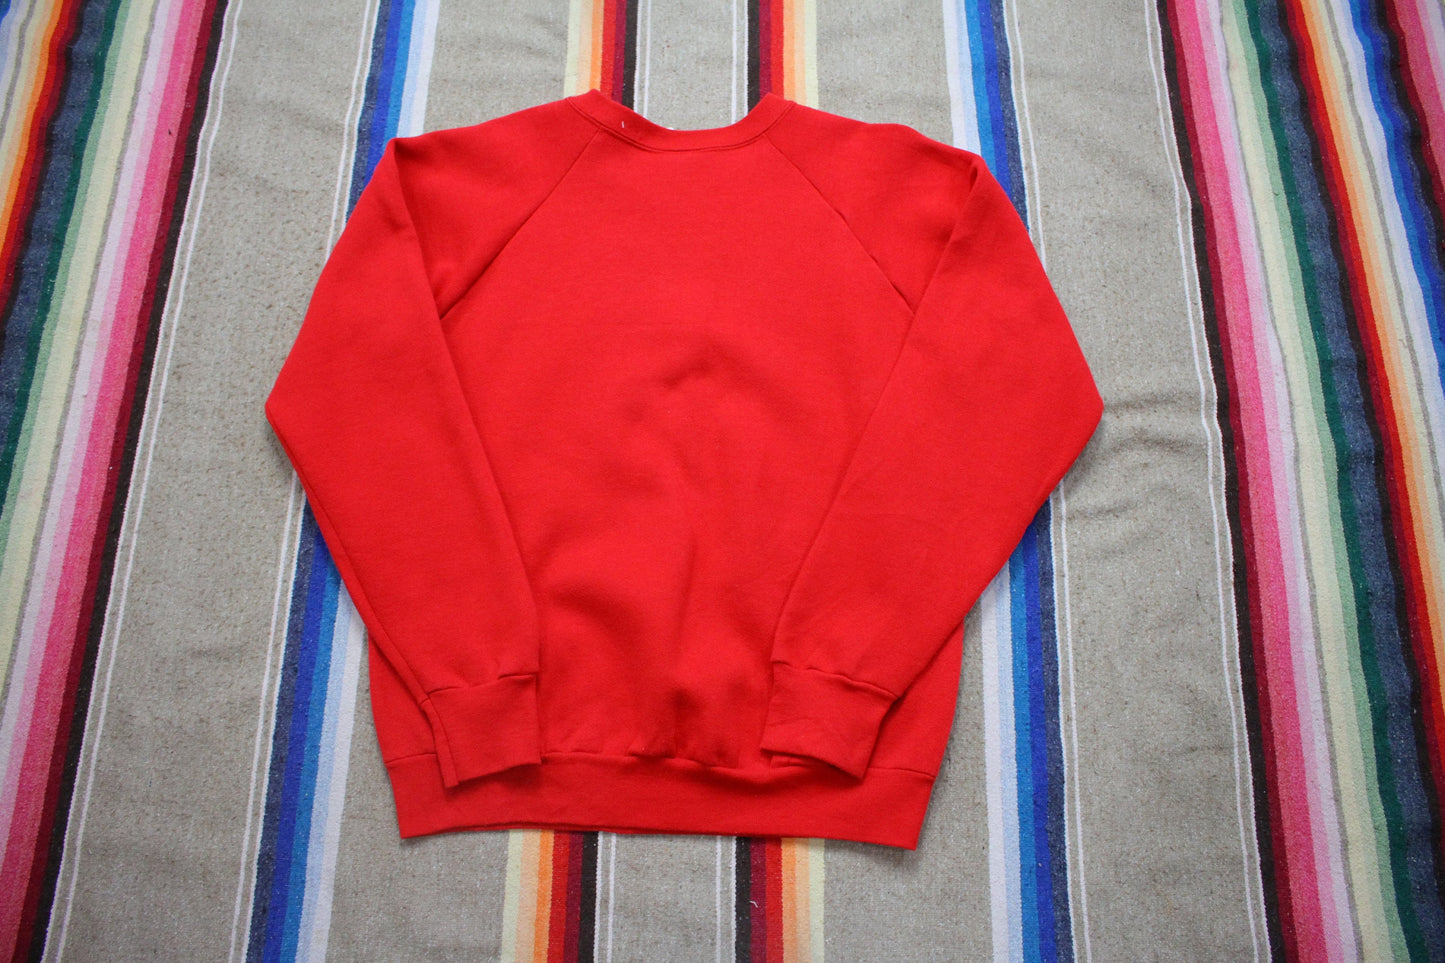 1980s 1987 Fruit of the Loom Merry Christmass Y'all Raglan Sweatshirt Made in USA Size L